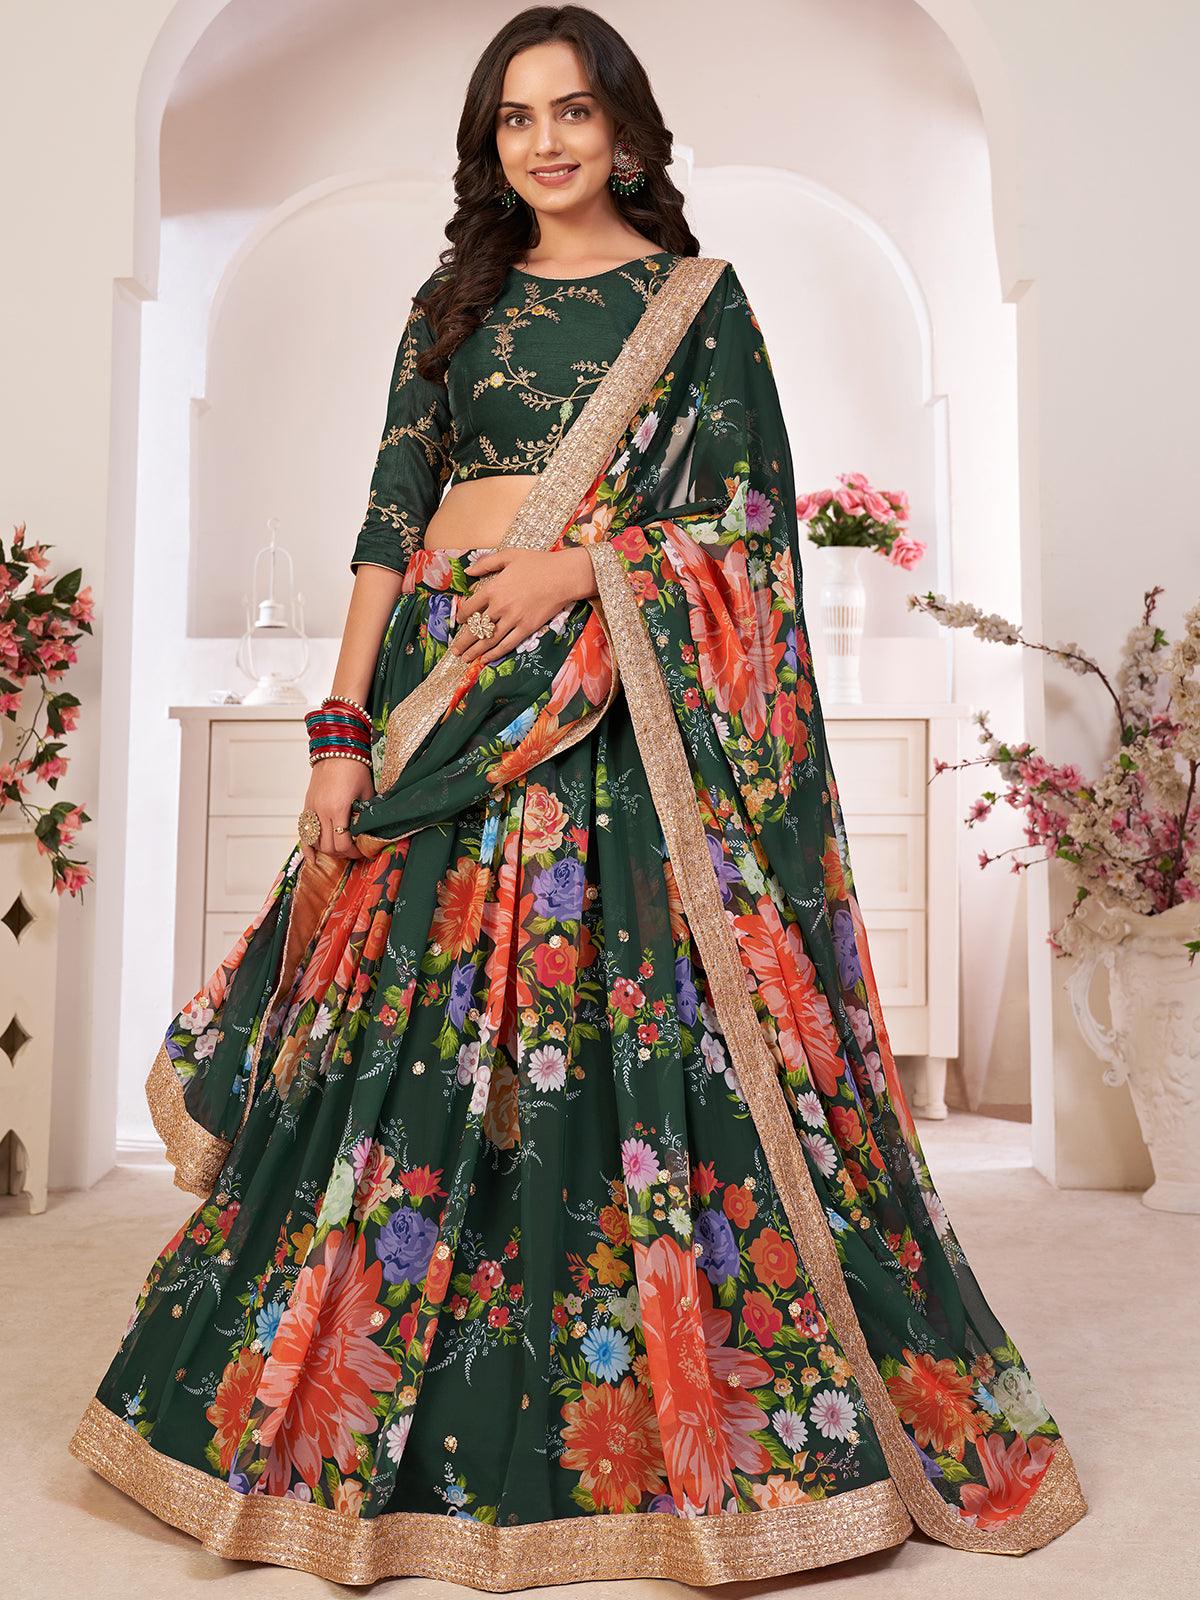 KRSH SERIES 151 HEAVY BUTTER SILK REAL MIRROR BOOK ONLINE LATEST SUPER COOL  EXCLUSIVE GRACEFUL ENGAGEMENT WEAR DESIGNER WOMENS NAVRATRI SPECIAL  STUNNING PRINTED CHANIYA CHOLI BEST BOUTIQUE LEHENGA SUPPLIER IN GUJRAT USA  -